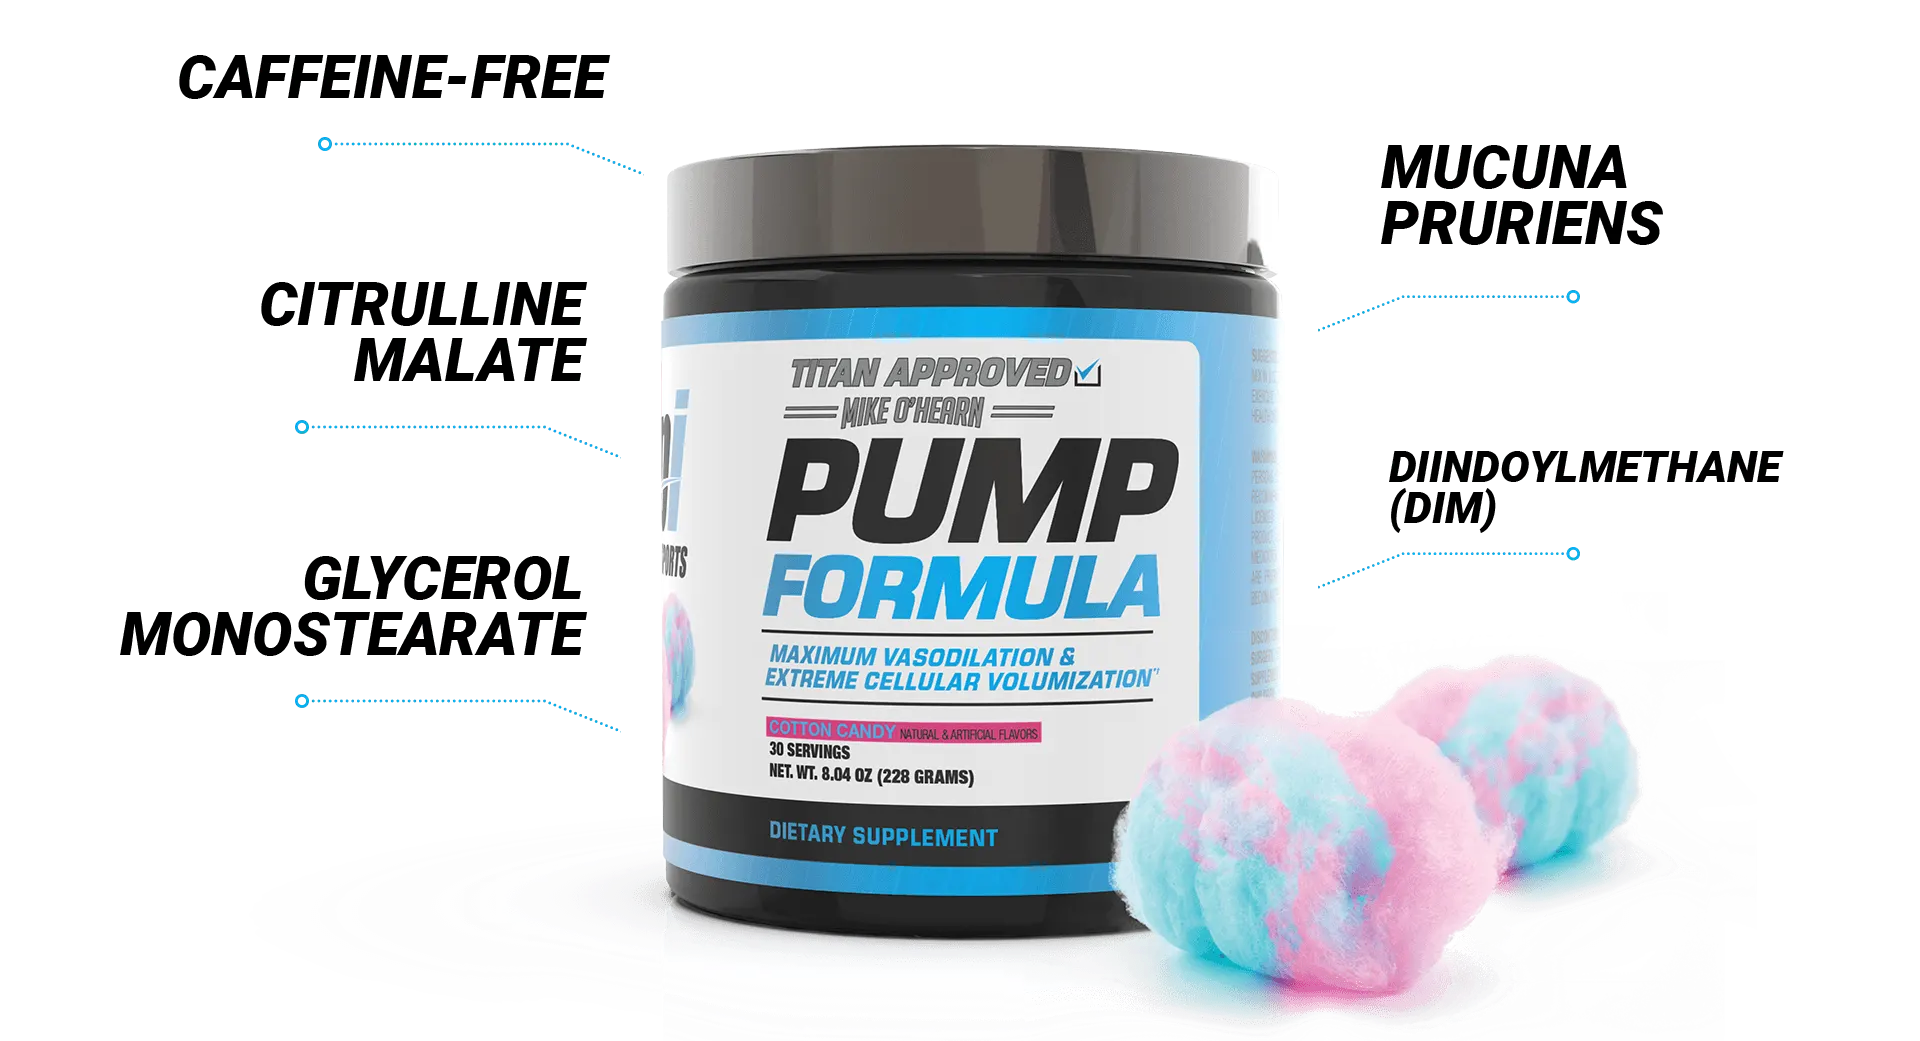 Container of Pump Formula with benefits